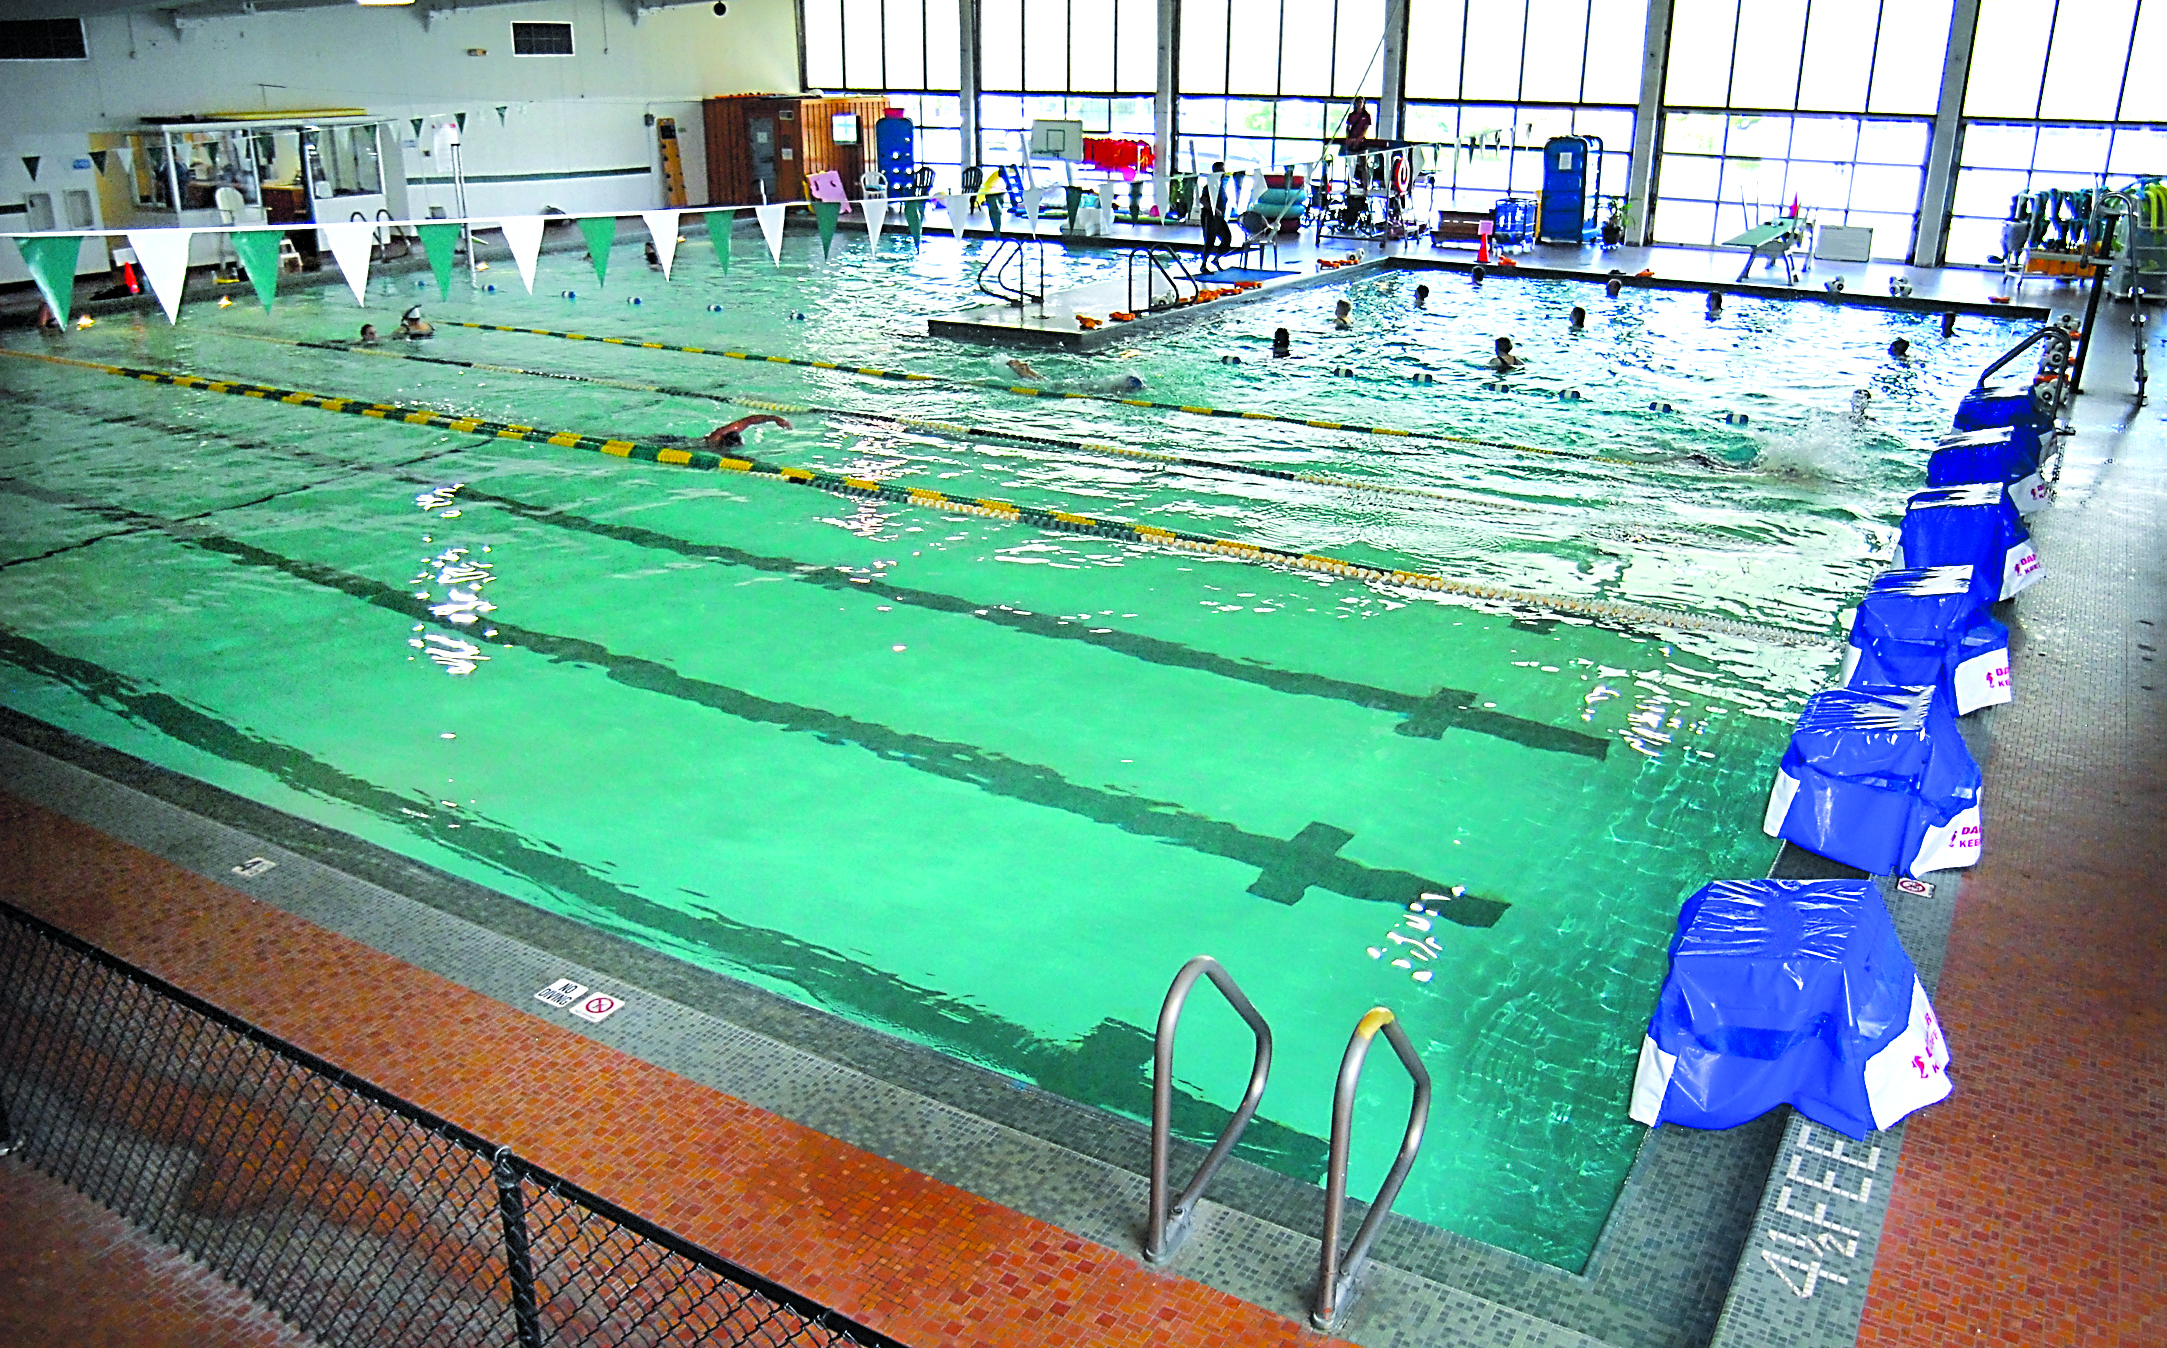 William Shore Memorial Pool in Port Angeles will be closed for upgrades and repairs.  -- Photo by Keith Thorpe/Peninsula Daily News